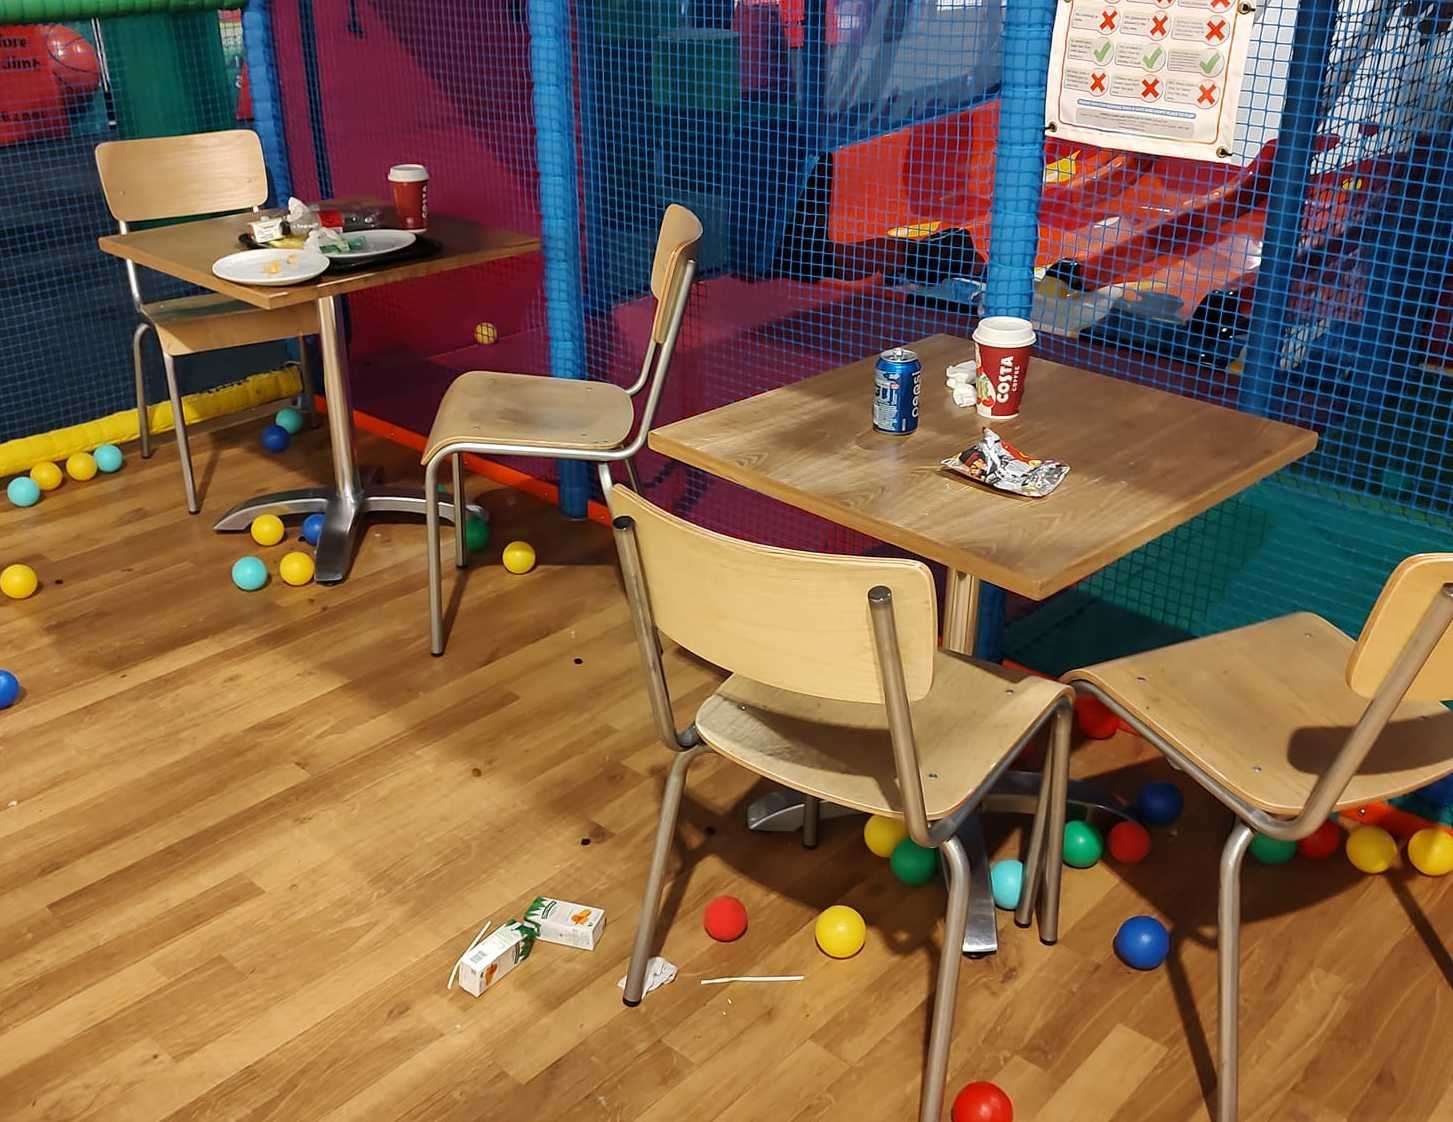 Rubbish was left behind on tables at the play centre. Picture: Becky Bee